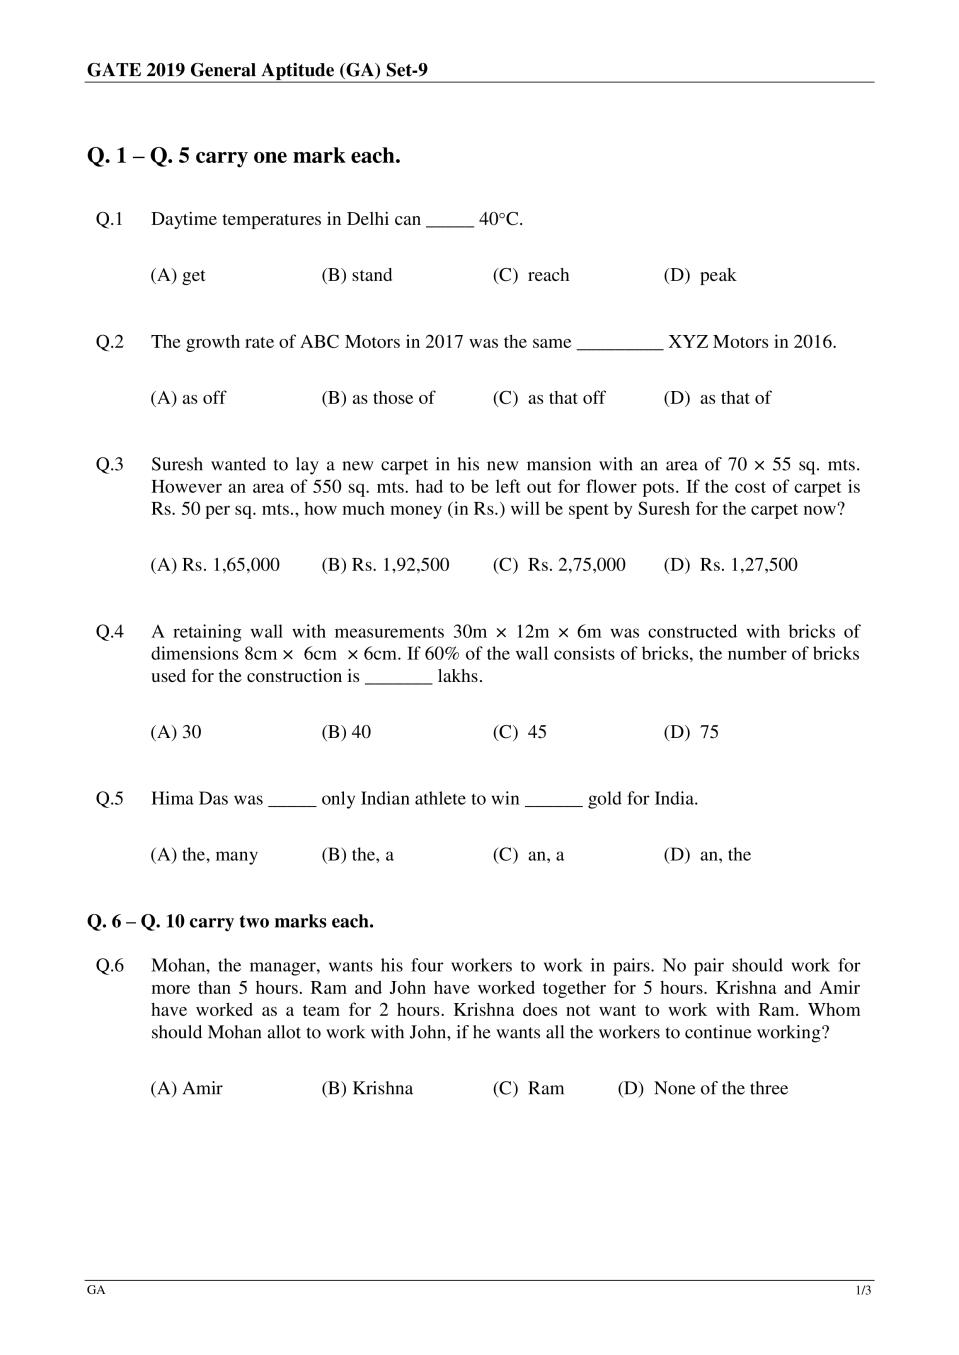 GATE 2019 Civil Engineering (CE) Question Paper with Answer Set 2 - Page 1